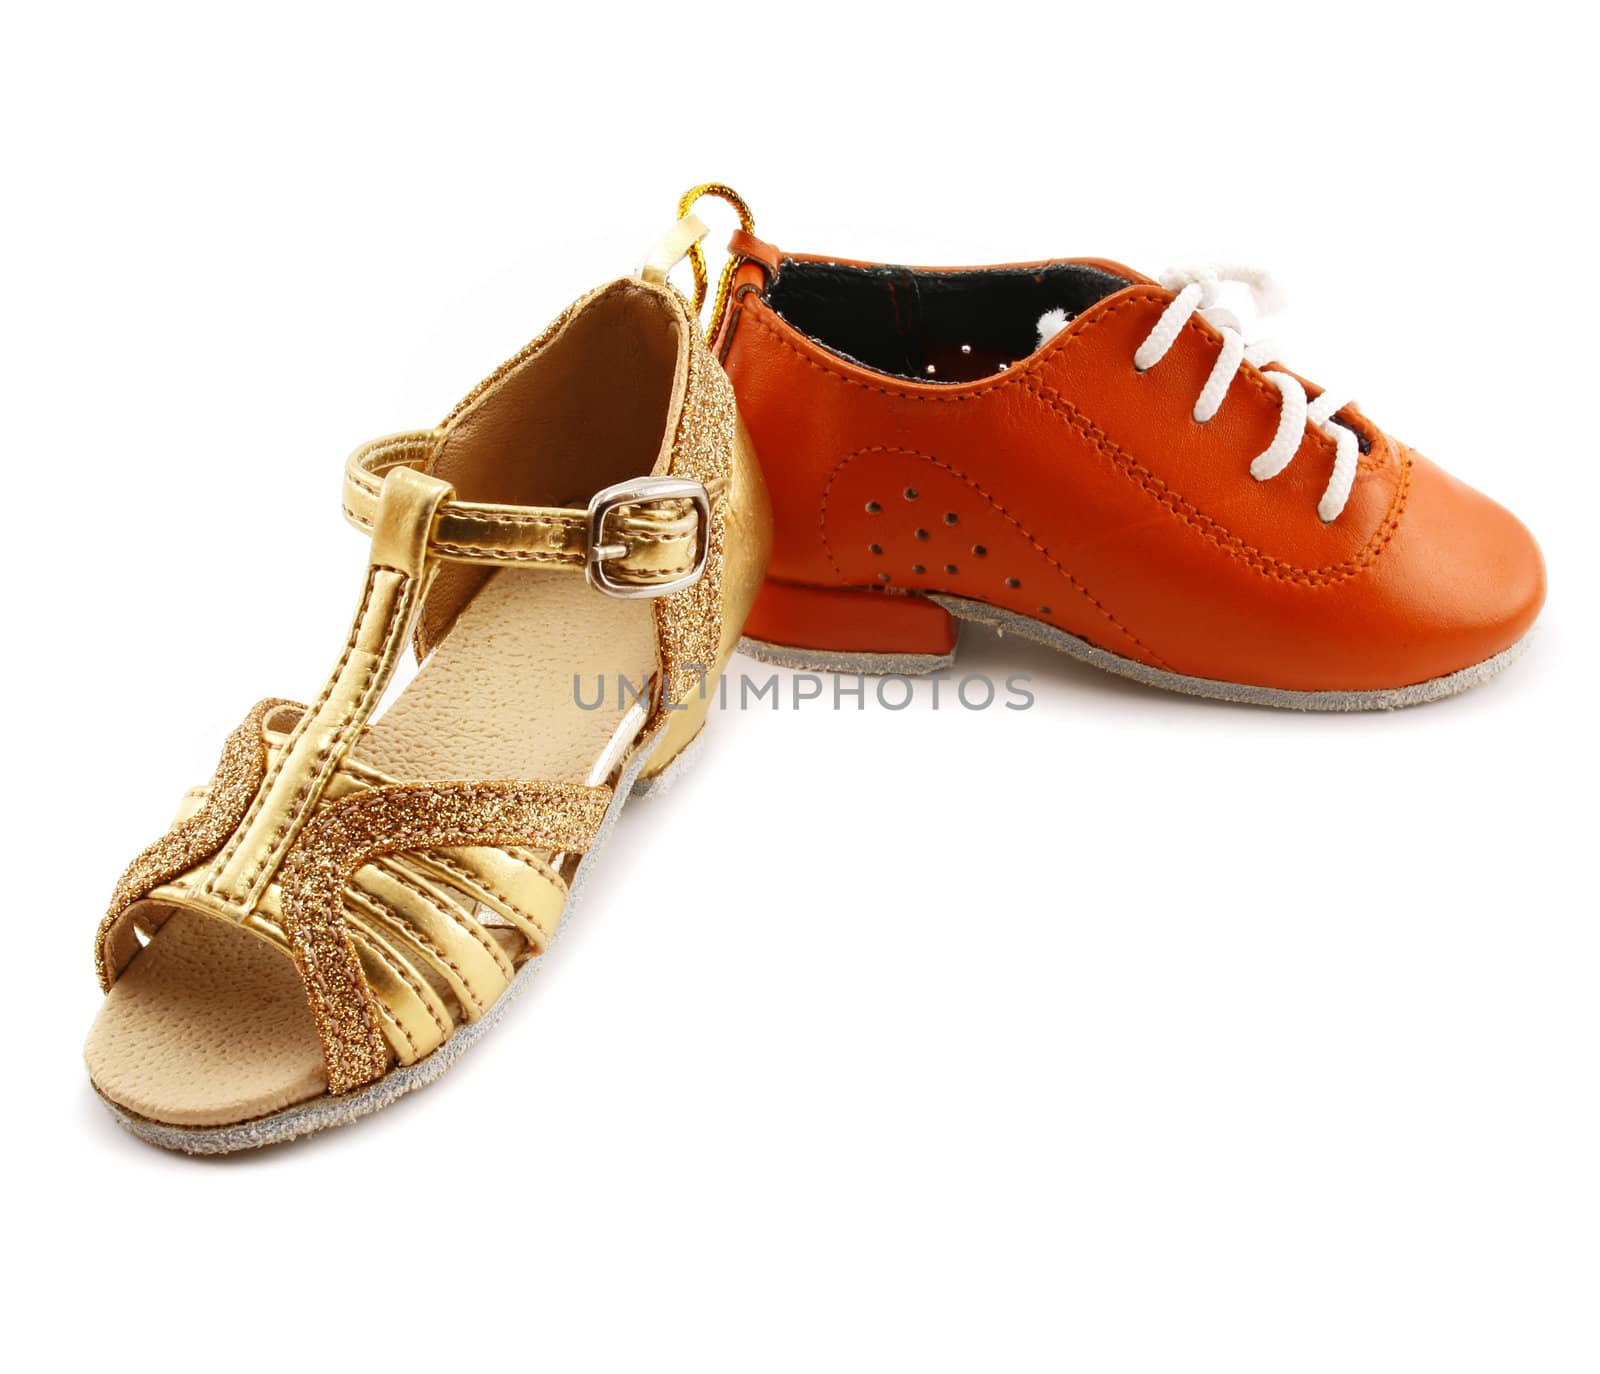 Dancing shoes (men's and woman's) isolated on a white background